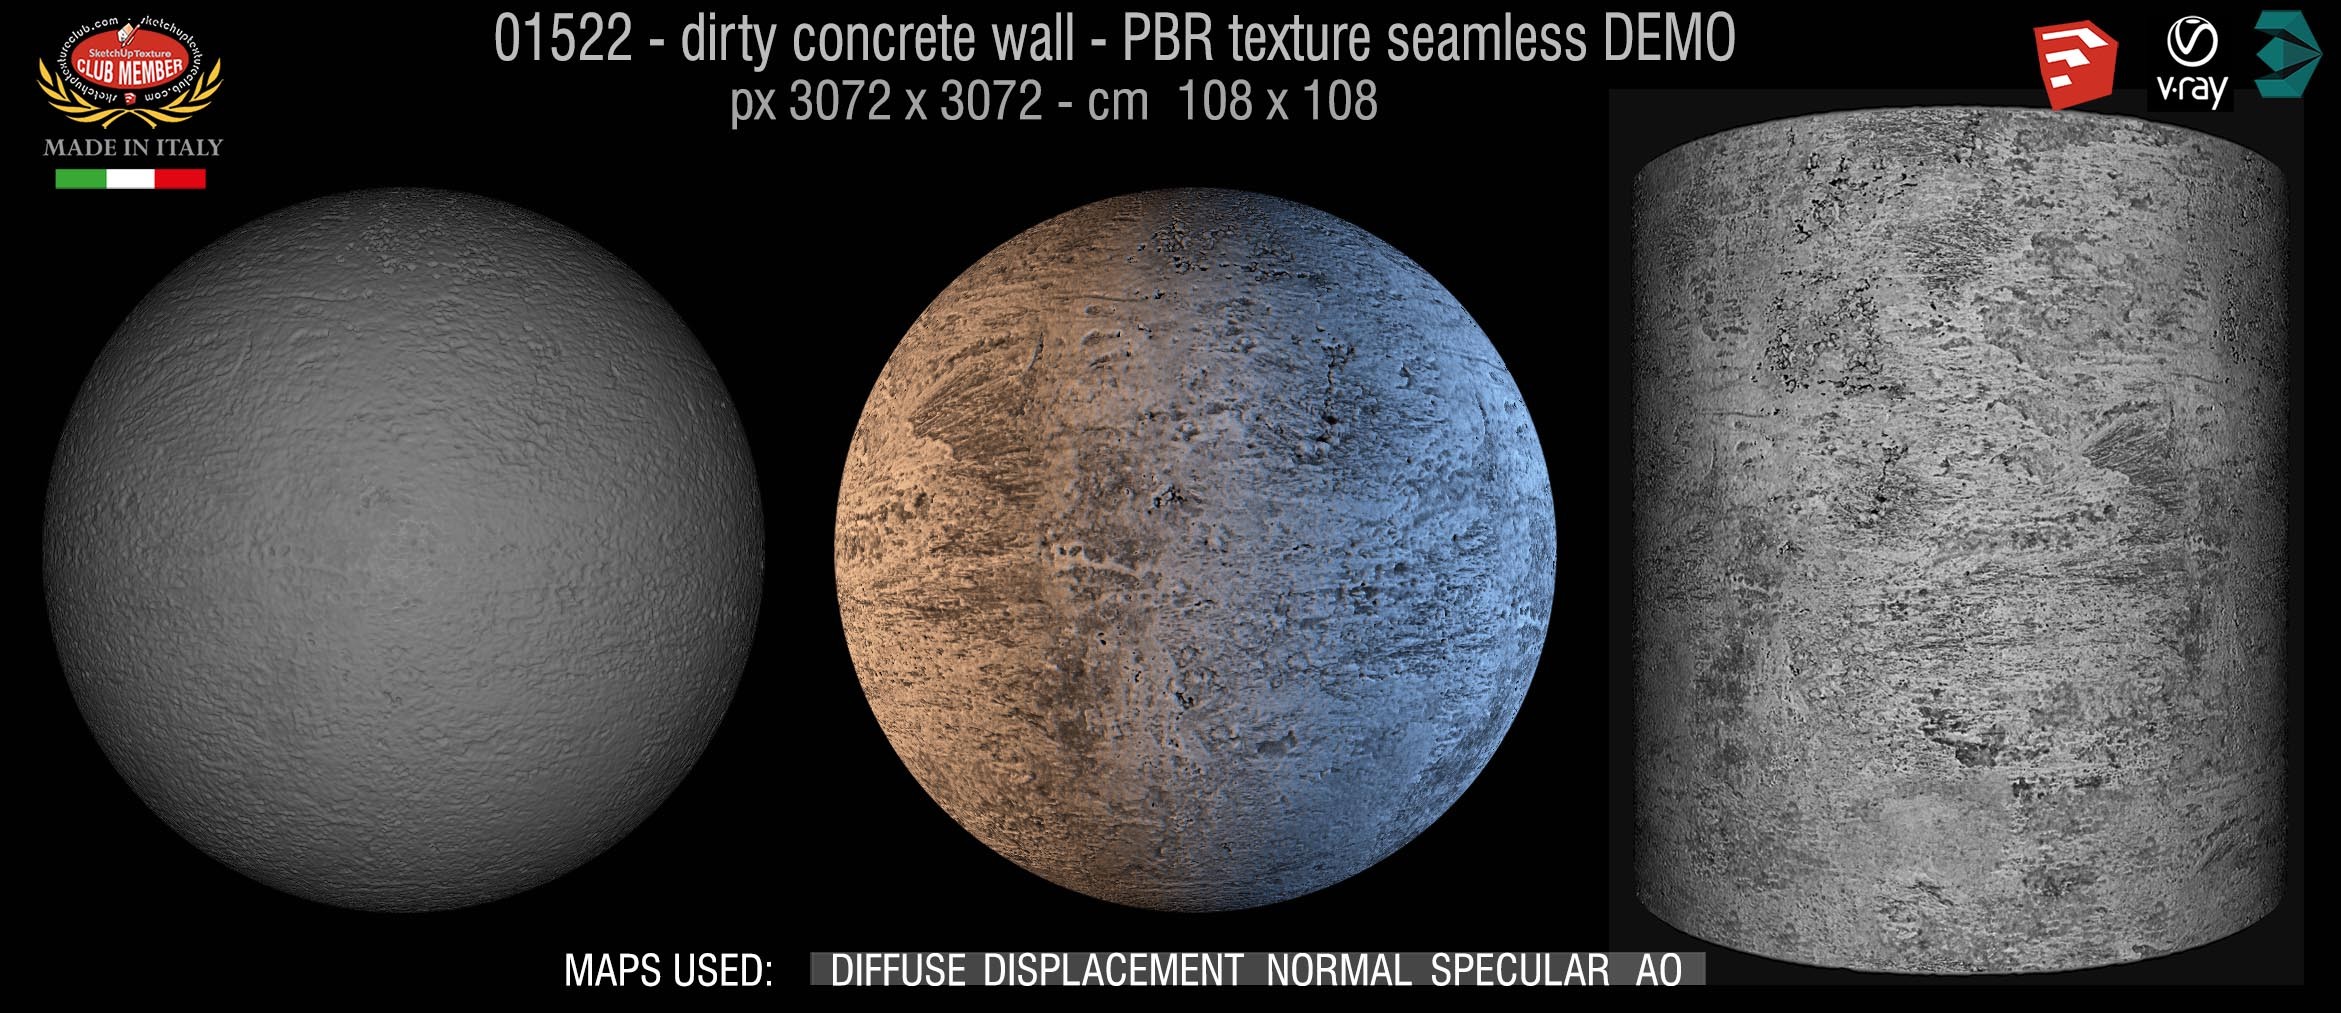 01522 Concrete bare dirty wall PBR texture seamless DEMO